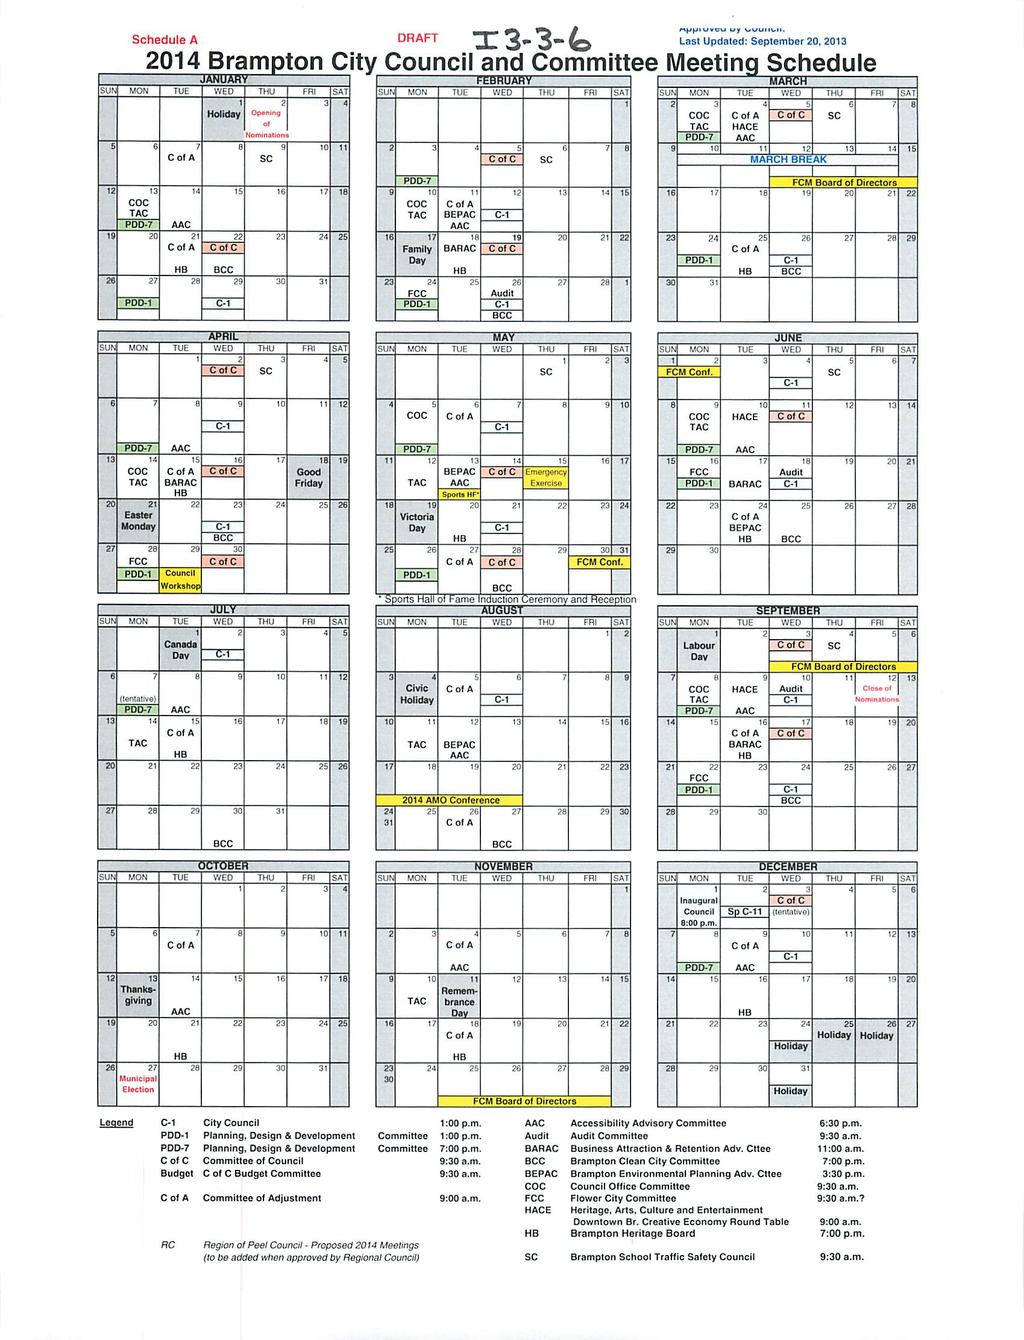 ' 2 DRAFT Schedule A Last Updated: September 20, 2013 2014 Brampton City Council and Committee Meeting Schedule JANUARY FEBRUARY MARCH sur MON :.